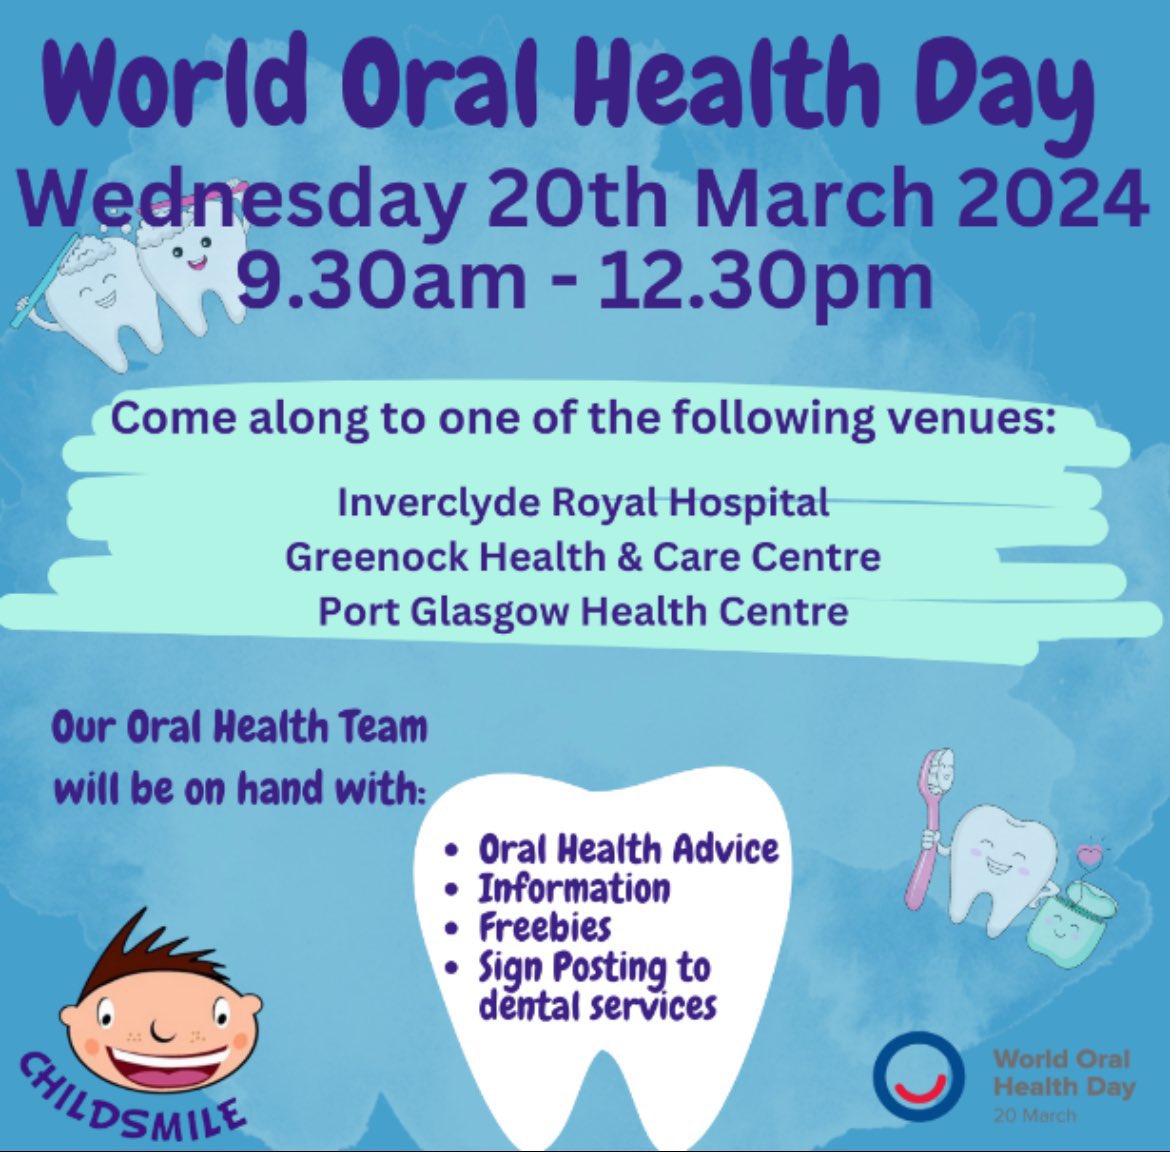 World Oral Health Day Wednesday 20th March 2024 Between 9.30am-12.30pm to one of our venues below: Inverclyde Royal Hospital Greenock Health & Care Centre Port Glasgow Health Centre Our Oral Health Team will be on hand with some Oral health advice, information & freebies